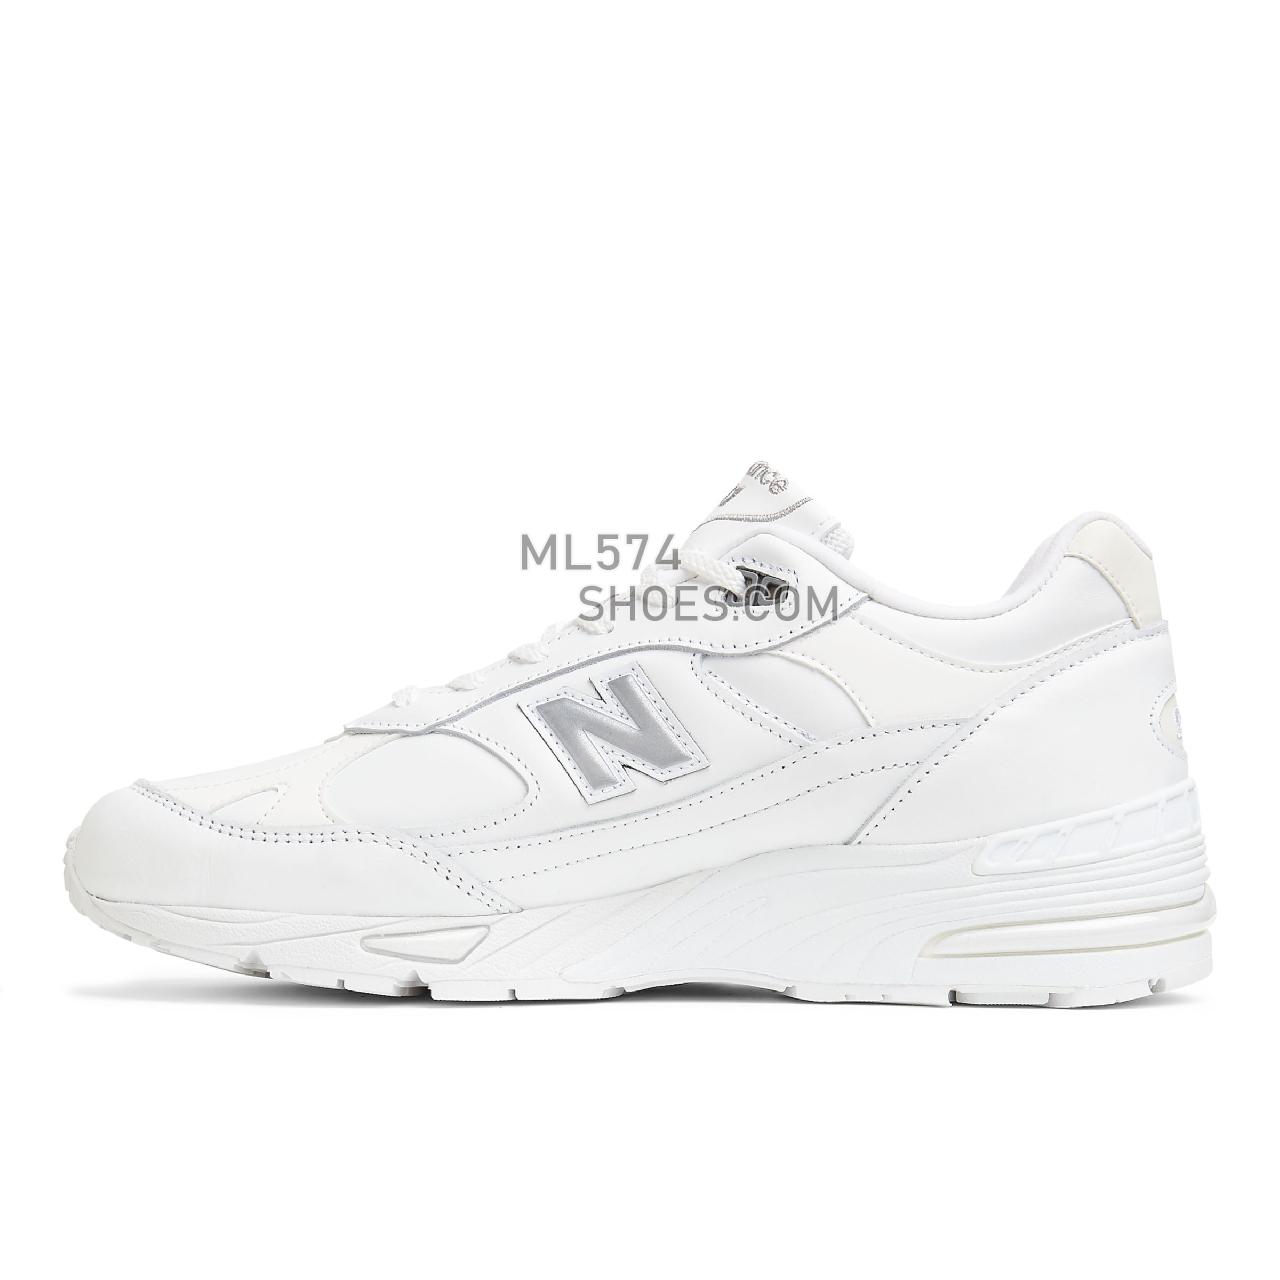 New Balance Made in UK 991 - Men's Made in USA And UK Sneakers - White with Grey - M991TW